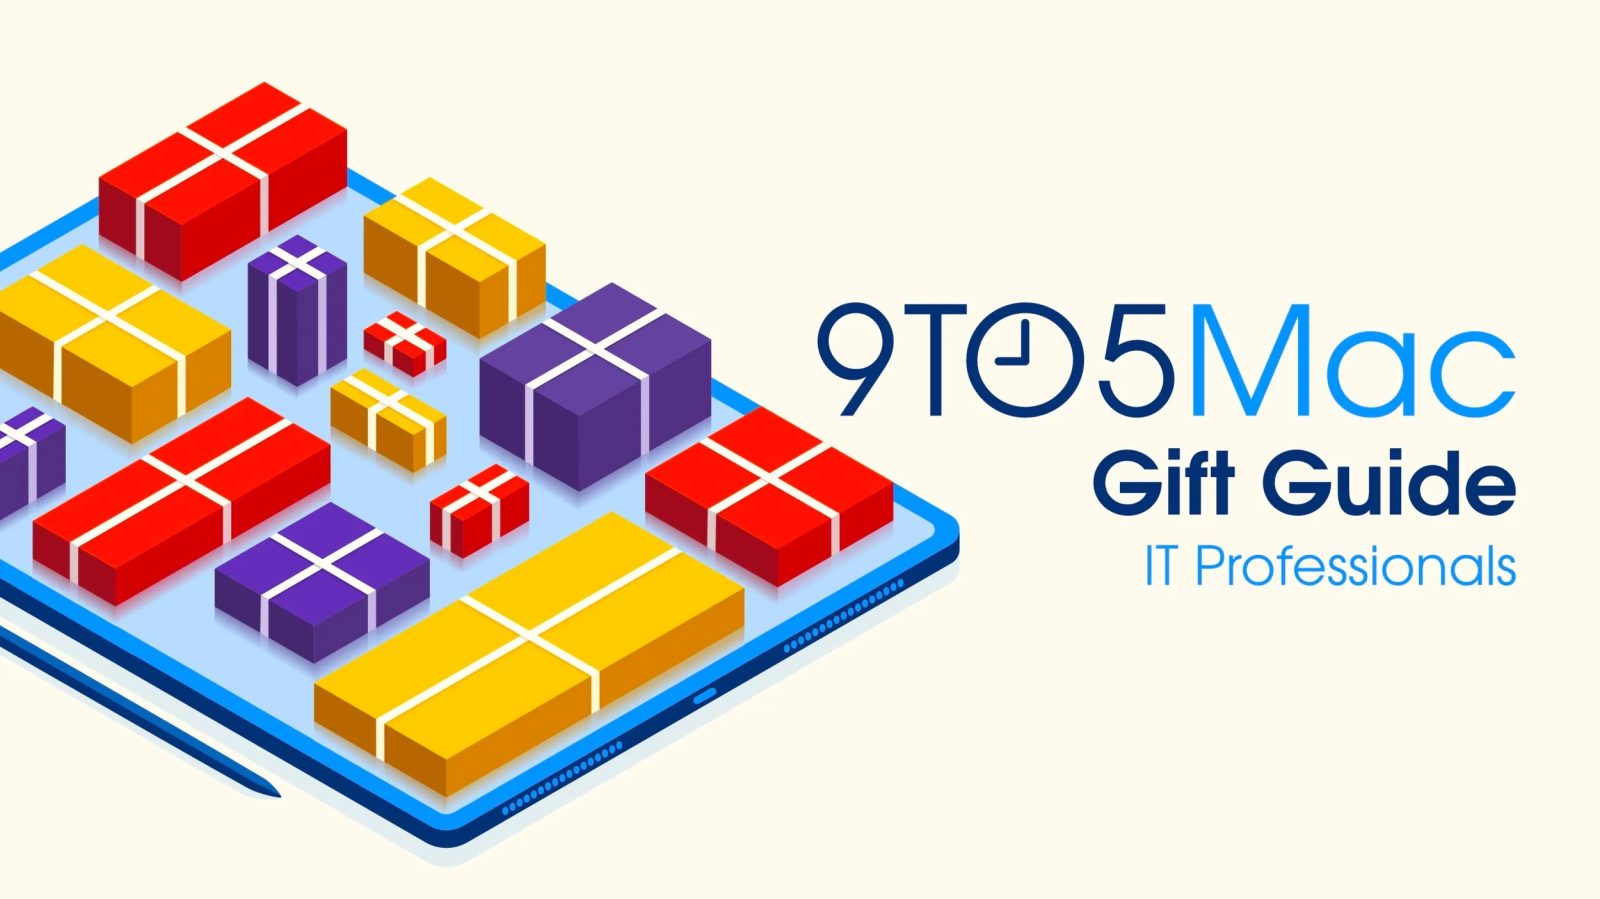 9to5Mac Gift Guide